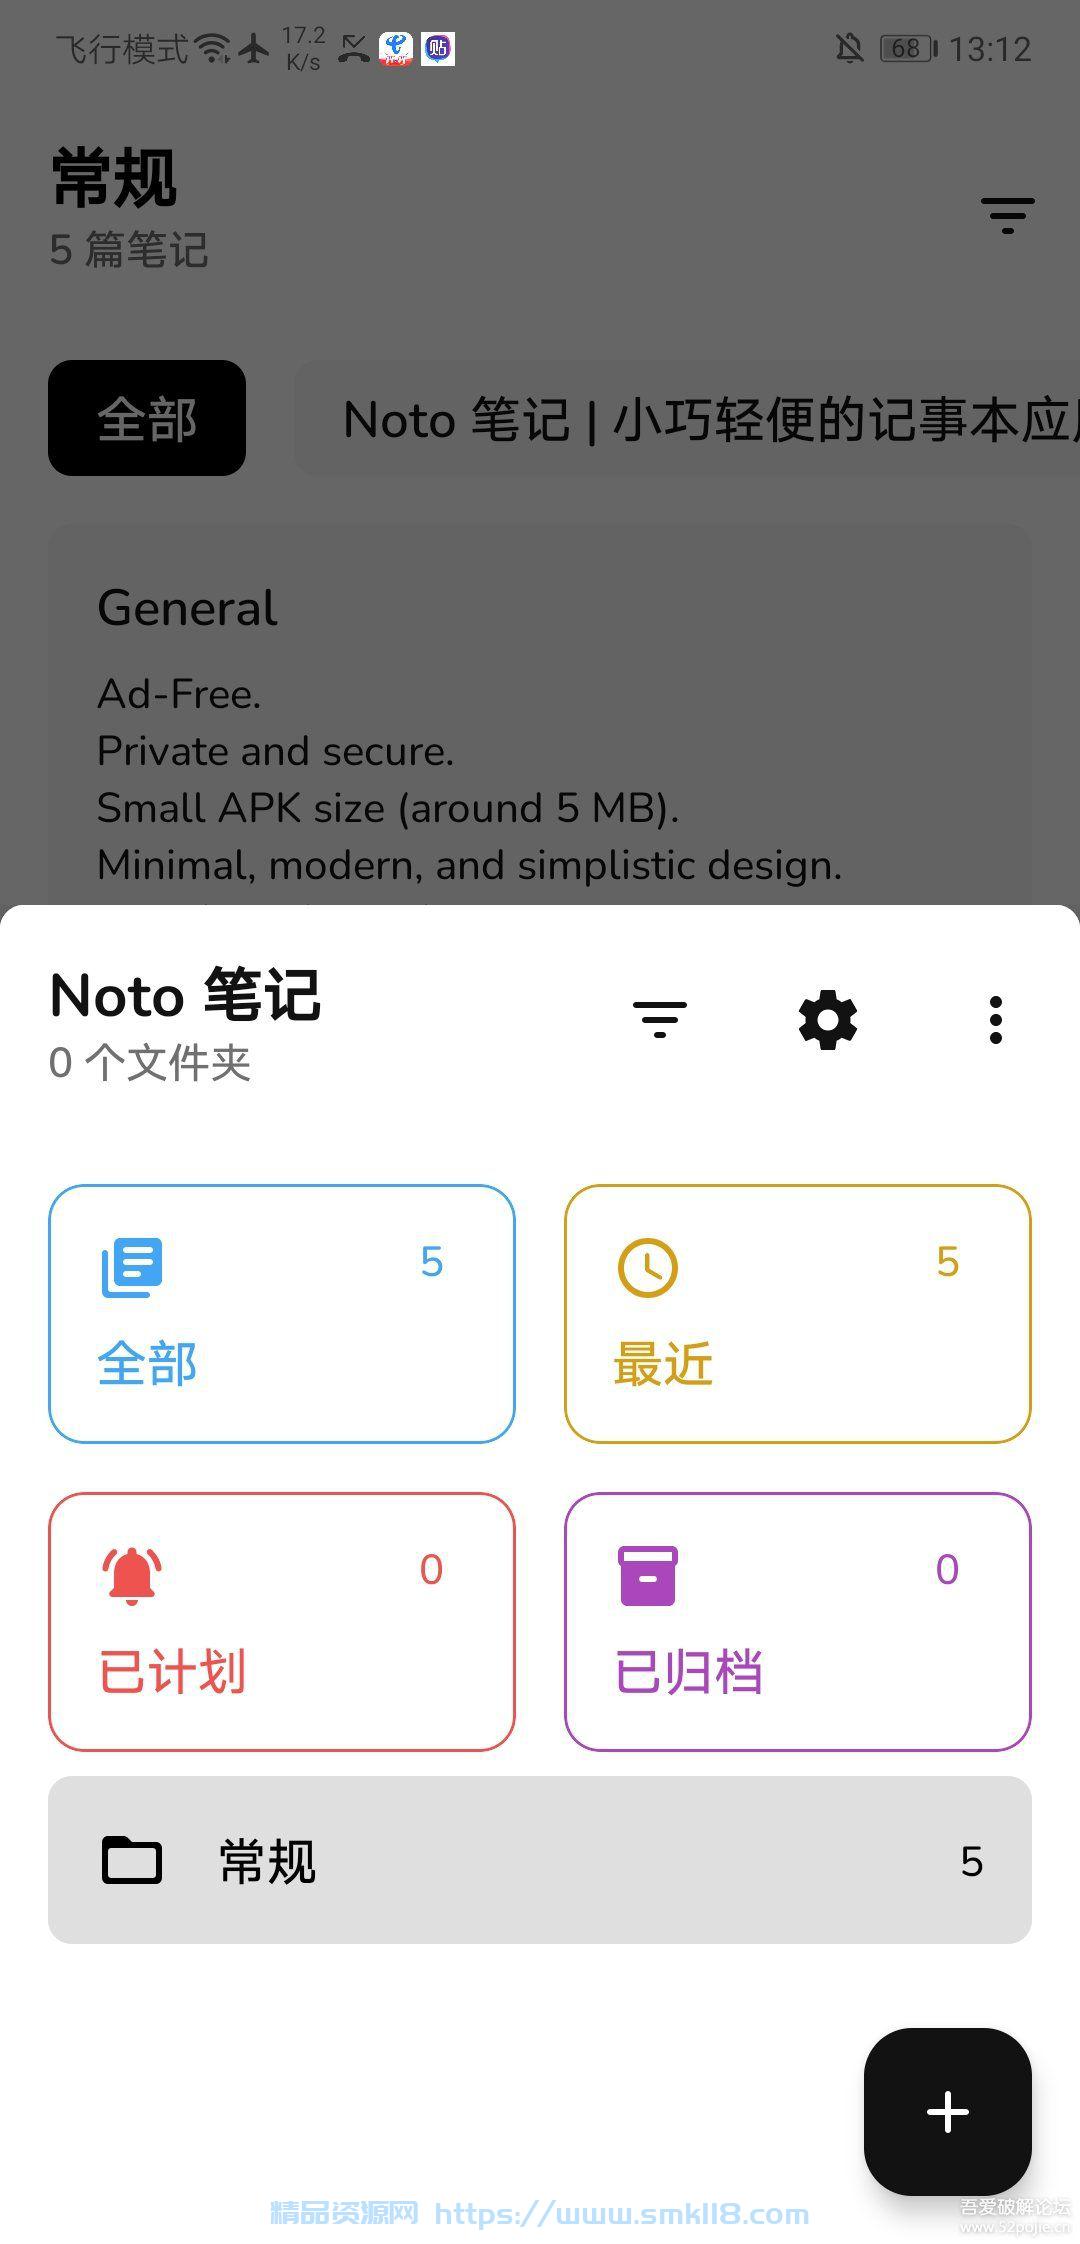 [Android] Noto笔记 v2.2.3(6.3mb)